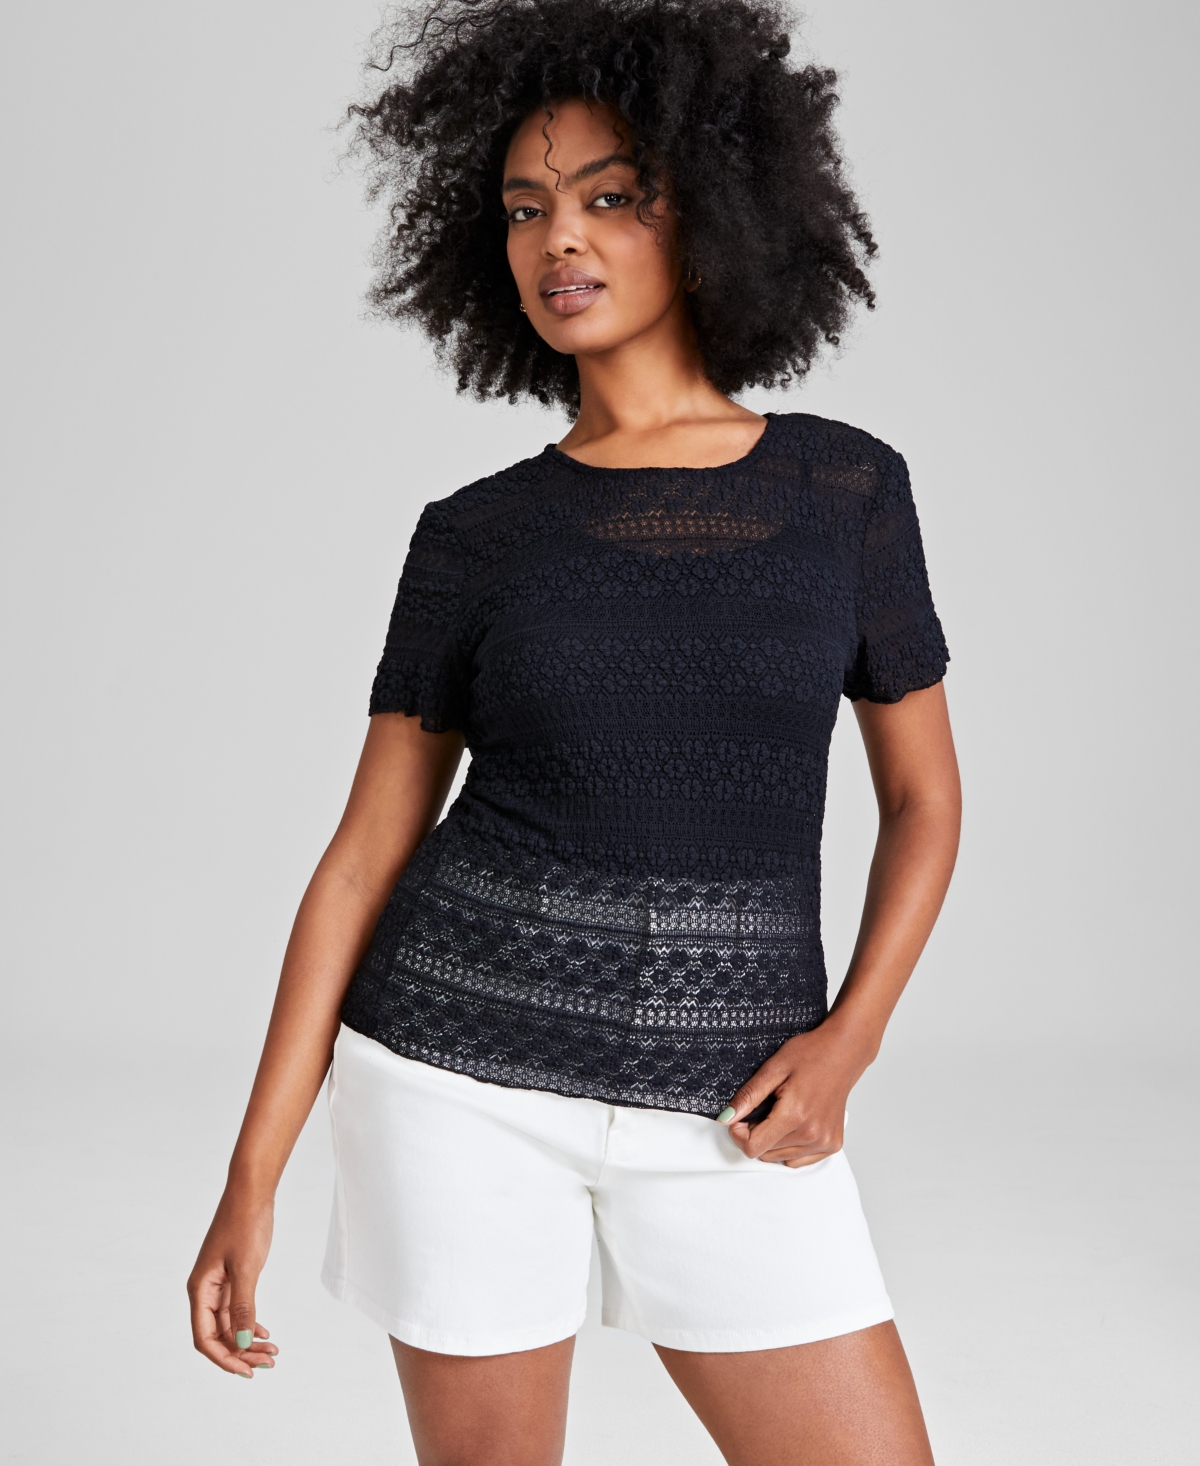 Women's Short-Sleeves Lace Top, Created for Macy's - Calla Lily